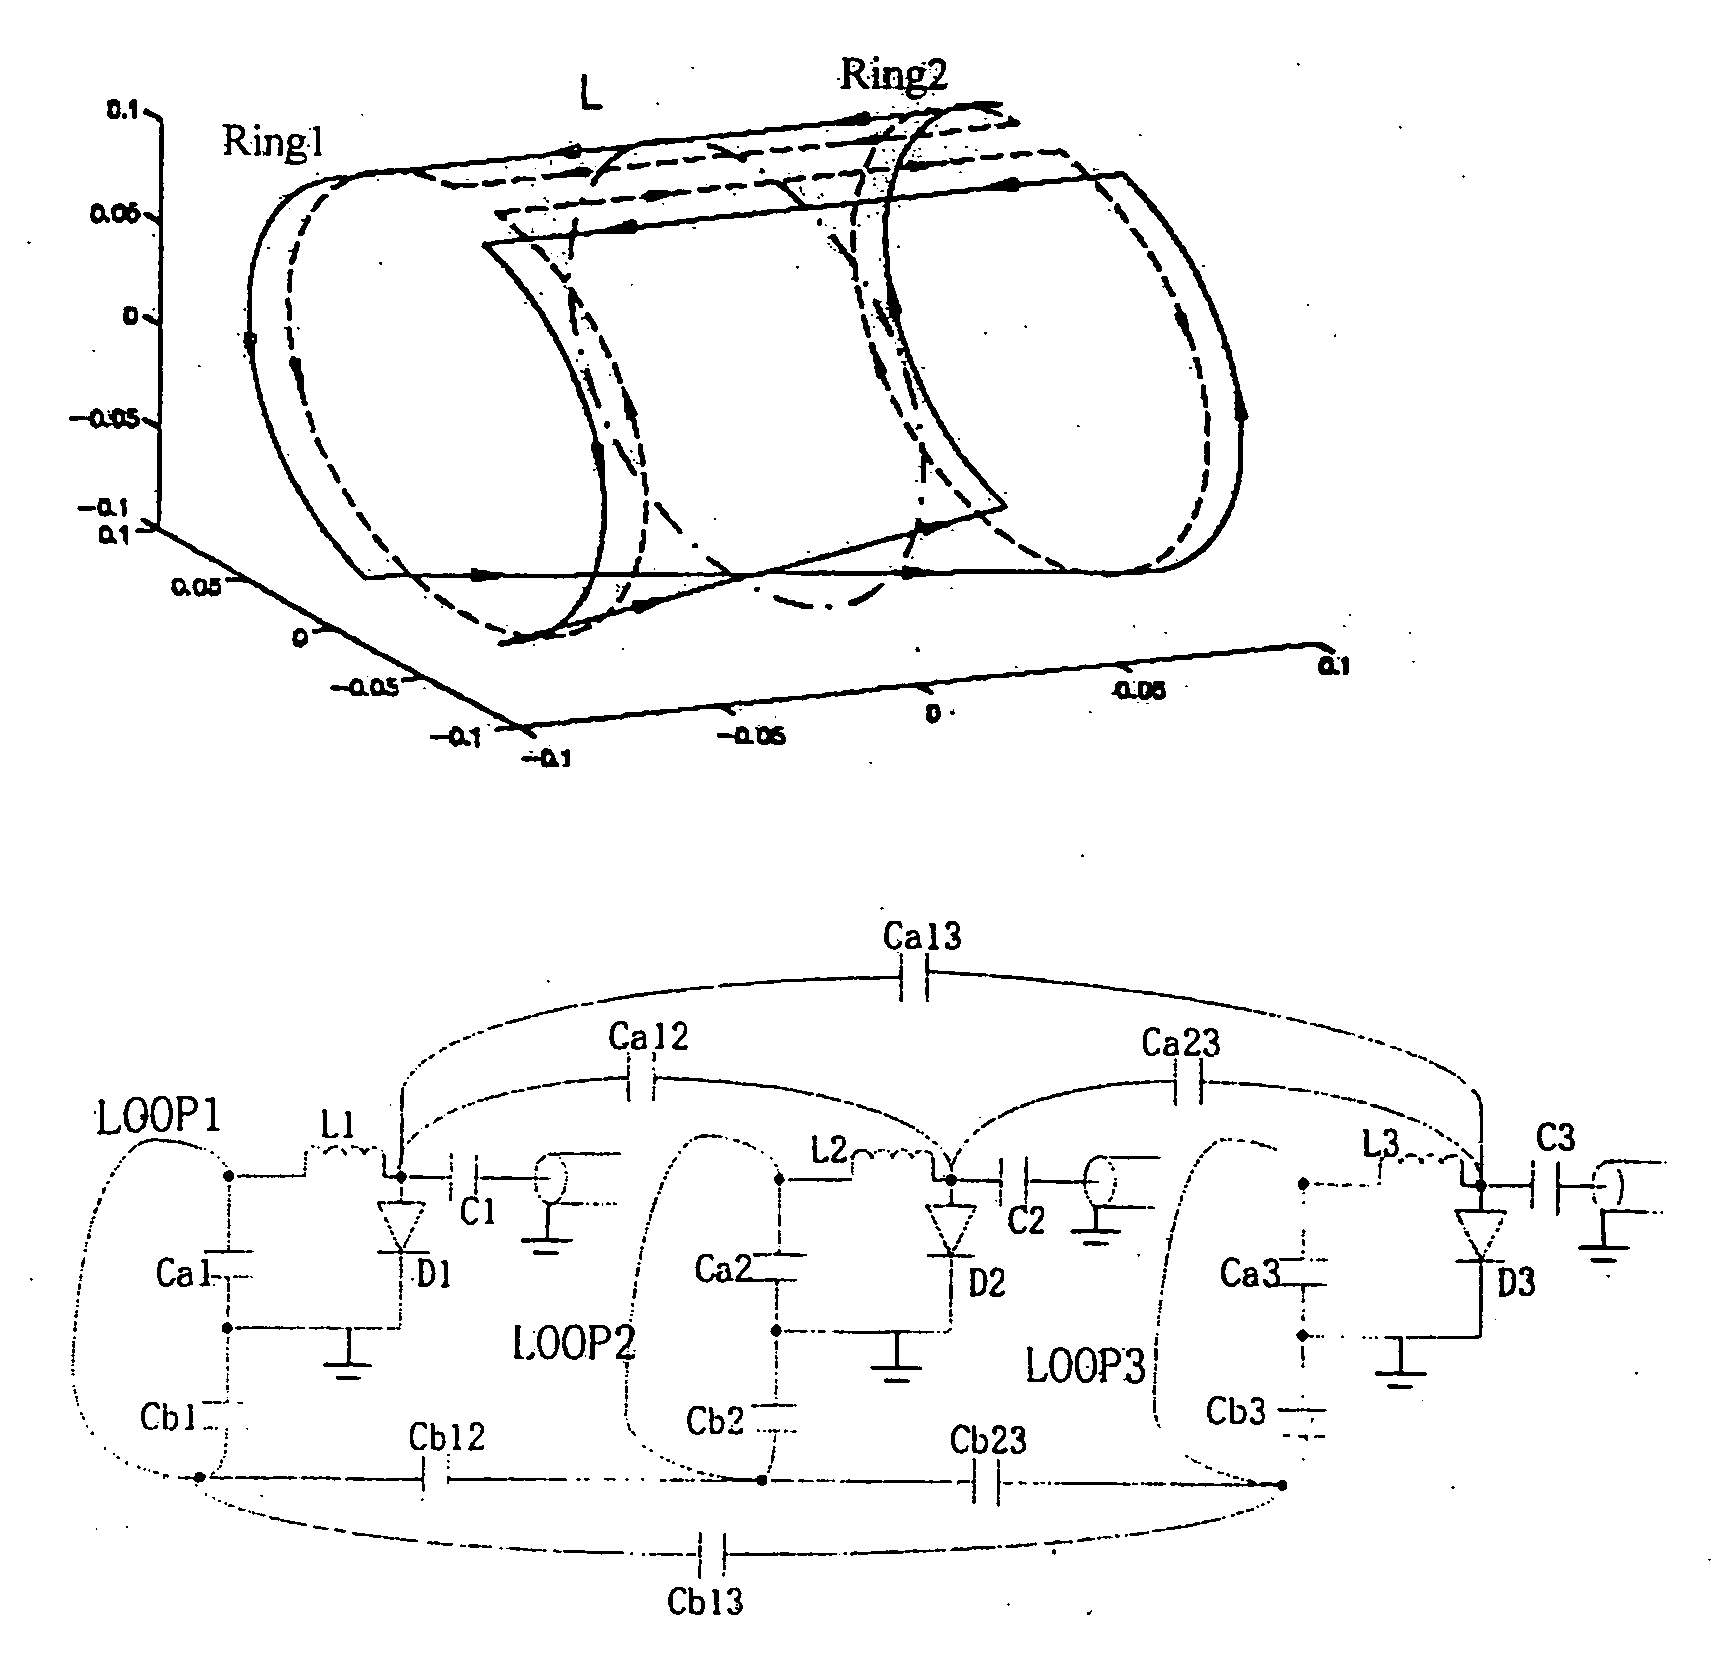 Receiver coil array for a magnetic resonance imaging system